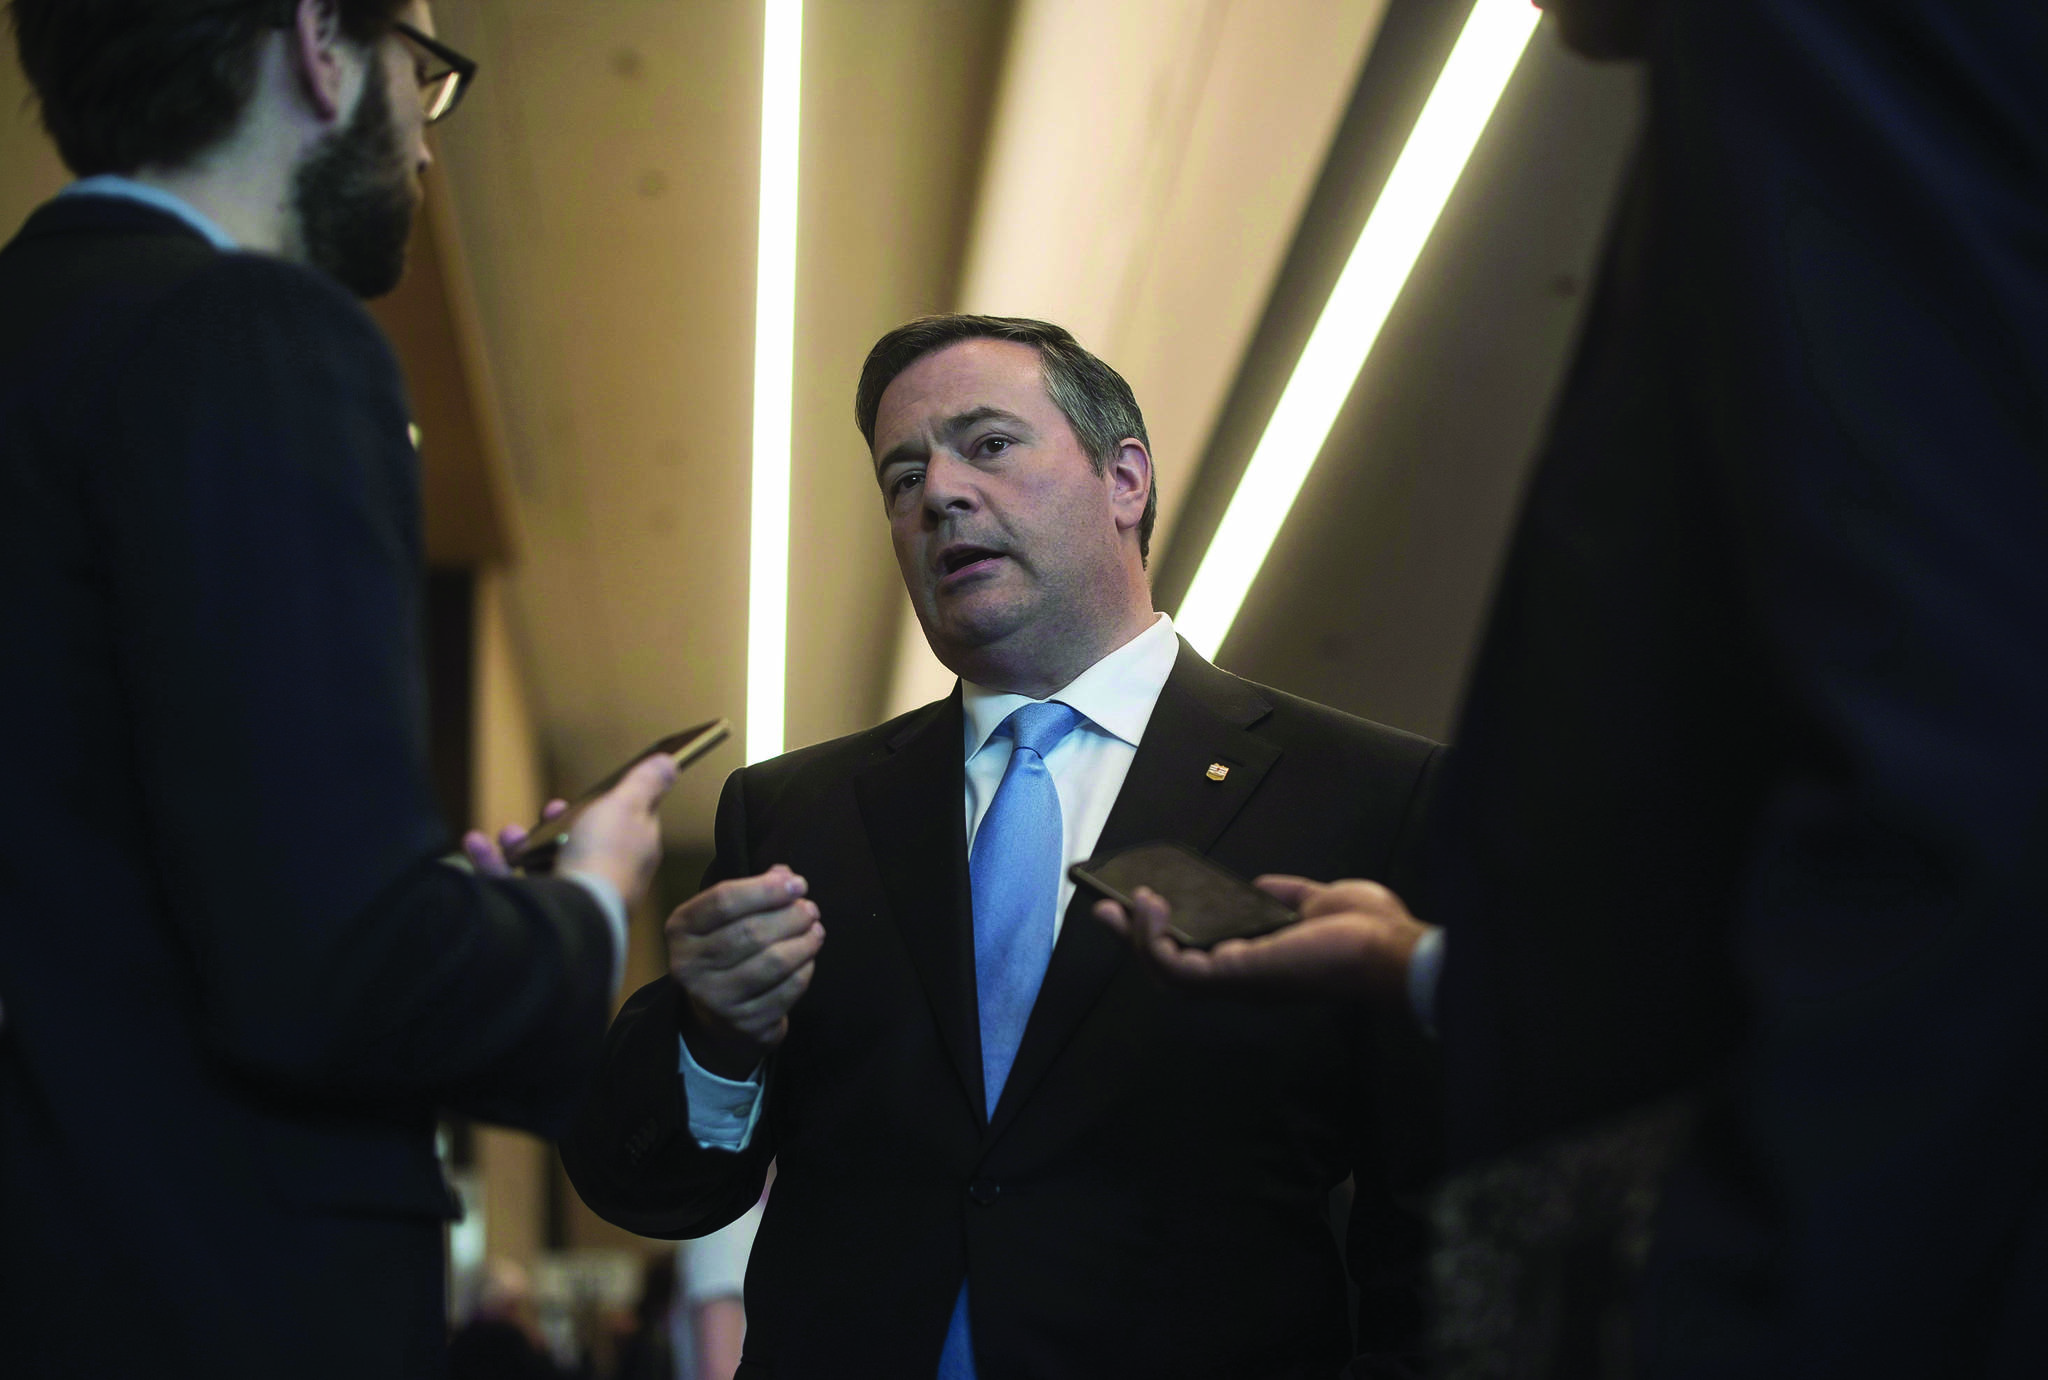 Fought to unite Alberta conservatives: Former MP Kenney ready to run for premier